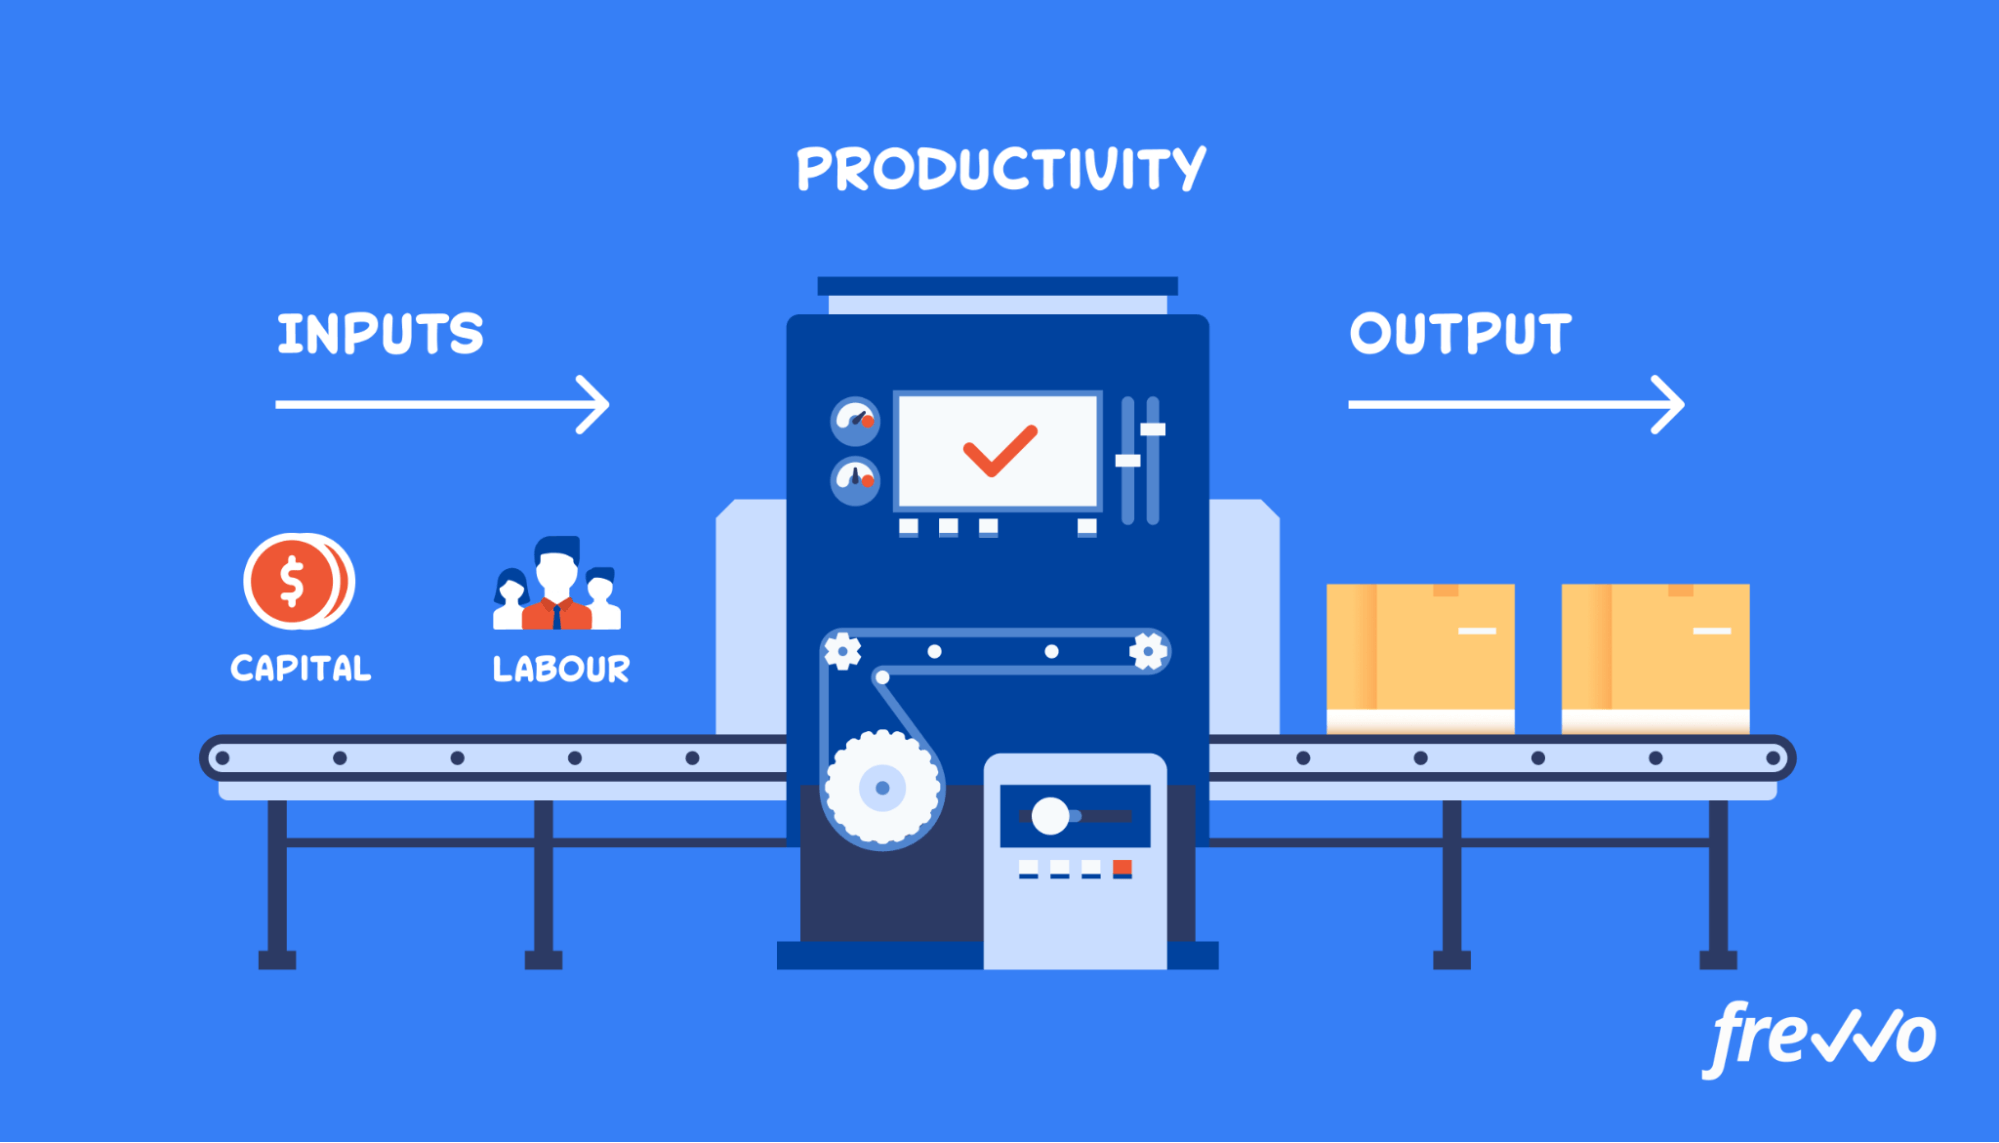 How productivity is measured